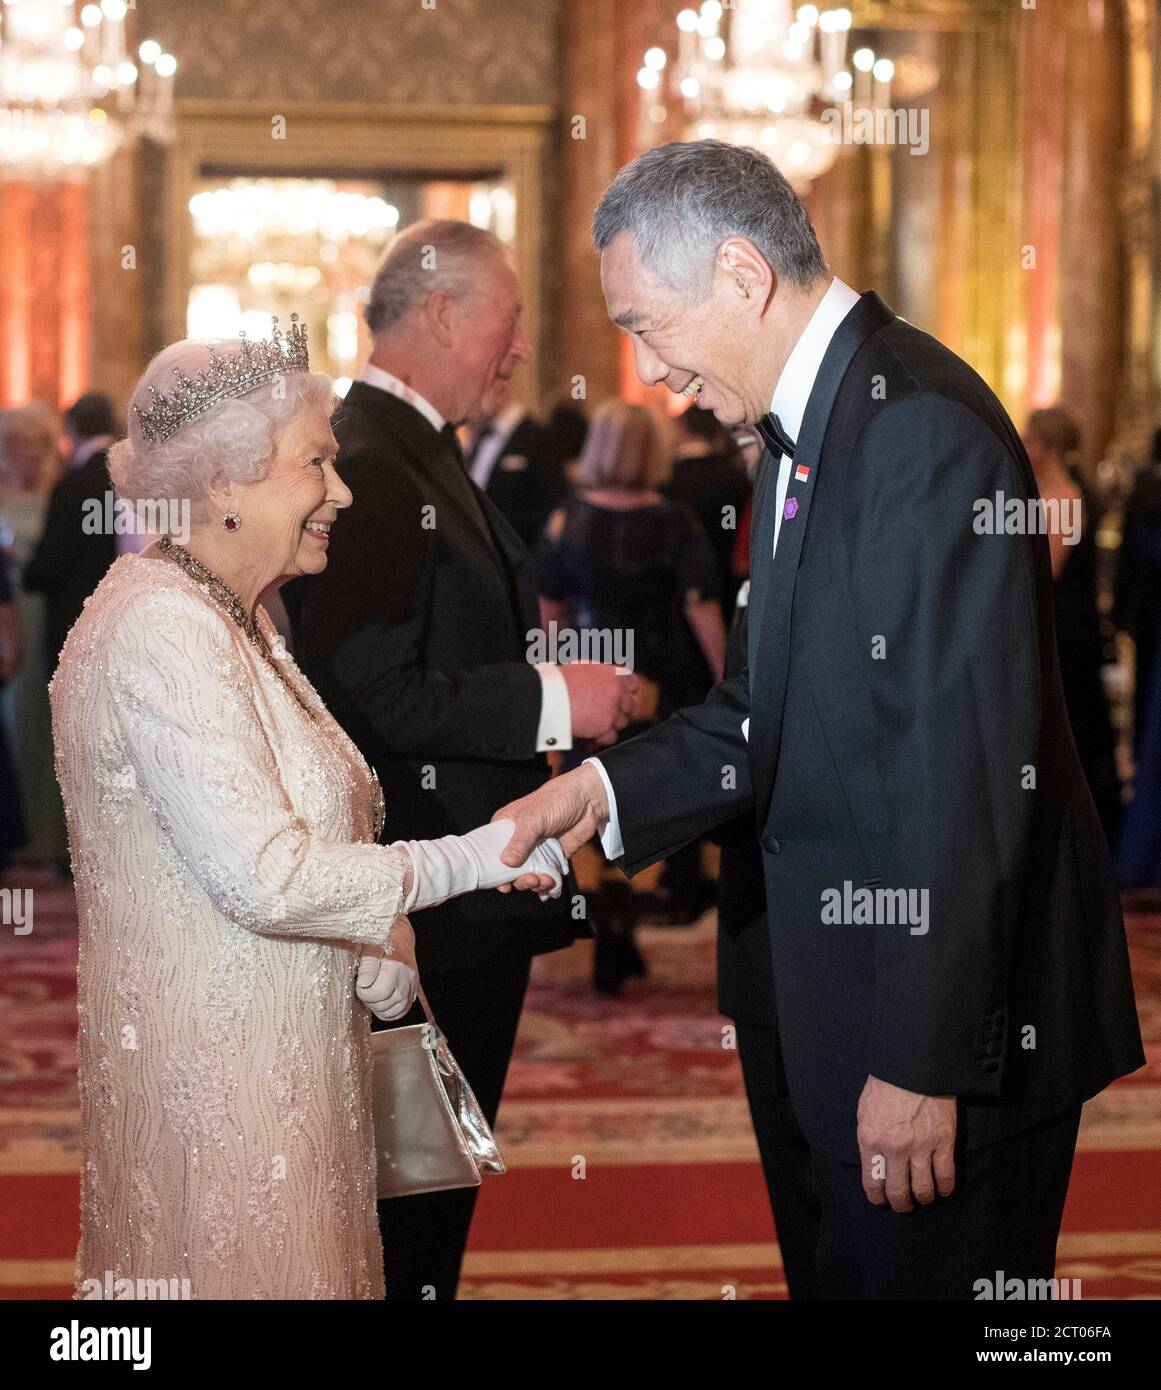 Queen Elizabeth II greets Lee Hsien Loong, Prime Minister of Singapore, in the Blue Drawing Room at Buckingham Palace in London as she hosts a dinner during the Commonwealth Heads of Government Meeting in London, Britain April 19, 2018. Victoria Jones/Pool via REUTERS Stock Photo